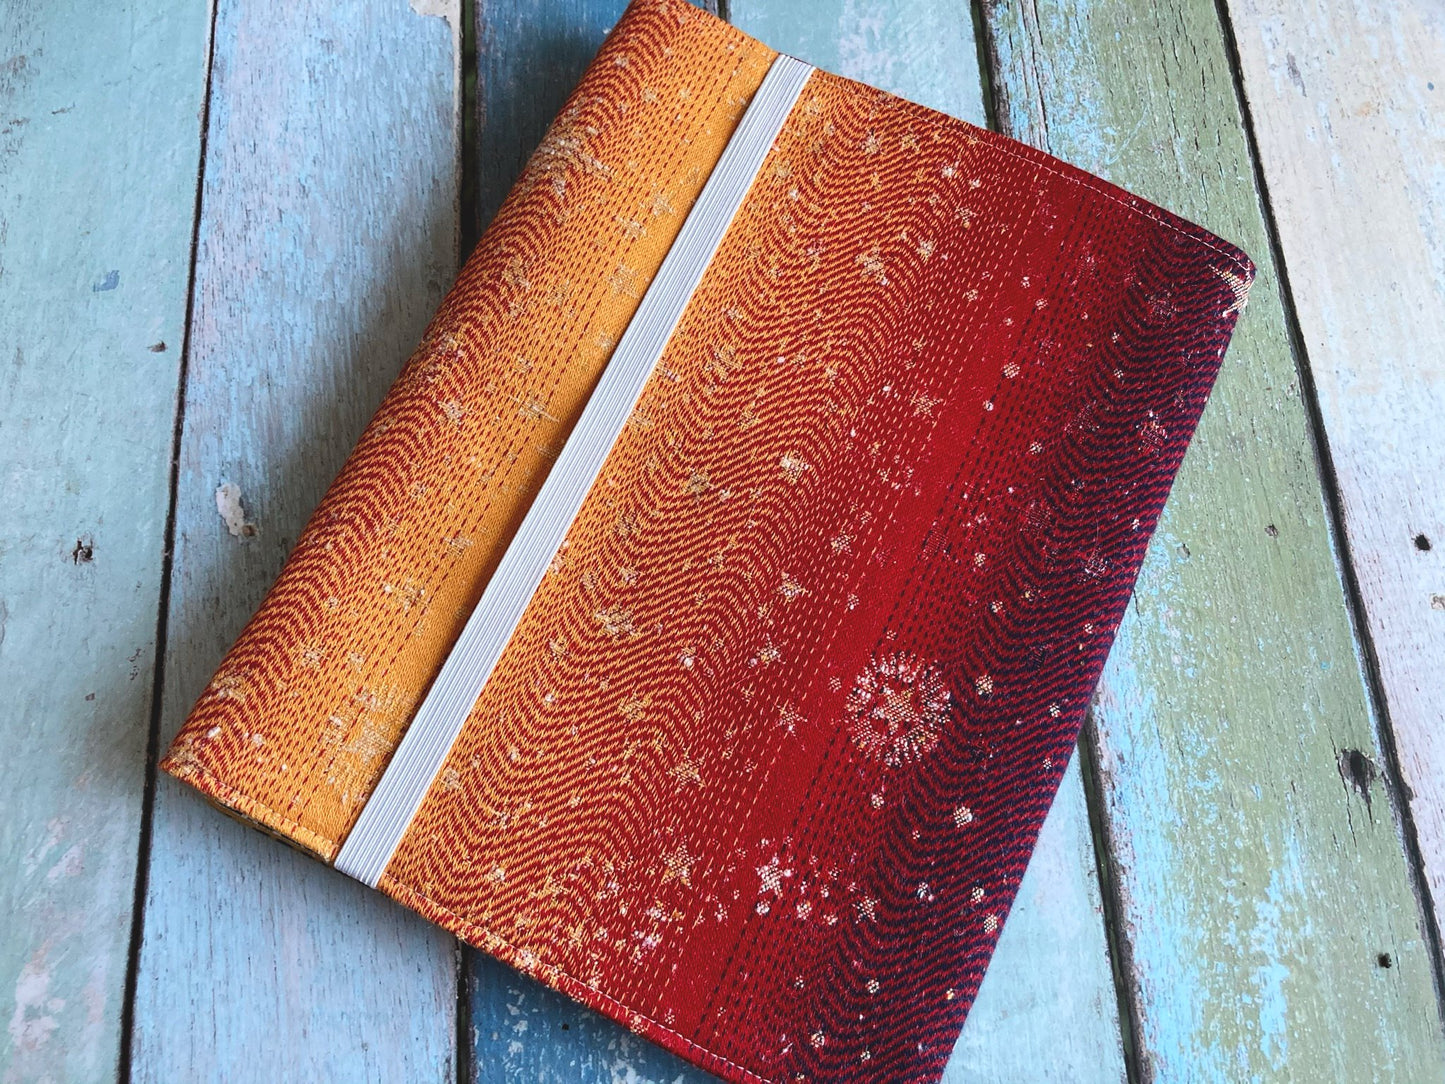 Mars Explorers Wanted Journal and Notebook Cover